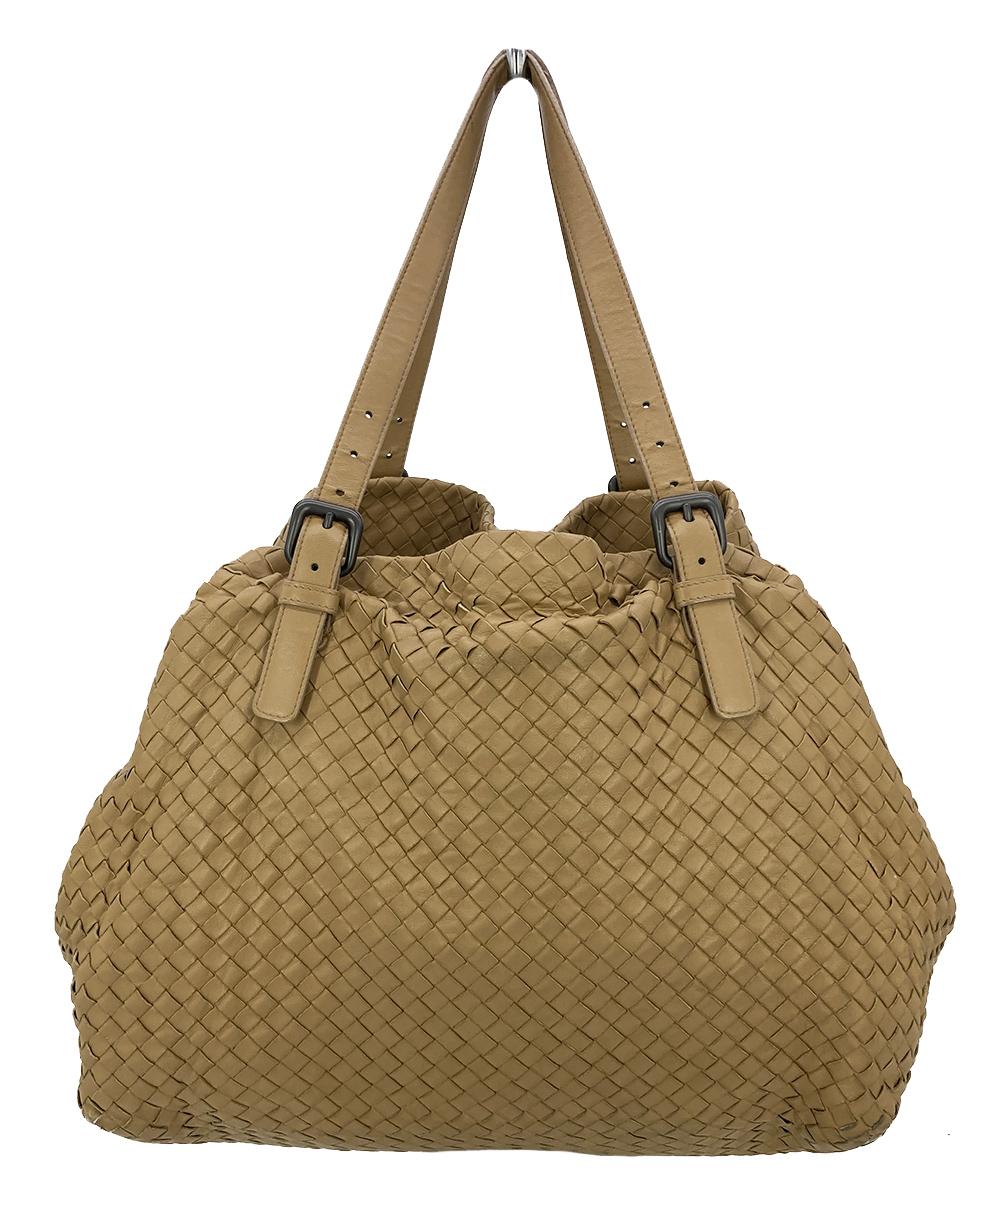 Bottega Veneta Tan Intrecciato Woven Nappa Leather Large Cesta Tote in good condition. Woven tan nappa leather with dark matte gray hardware. XL size and super soft leather from use. Top pinch latch closure opens to a brown suede interior with 2